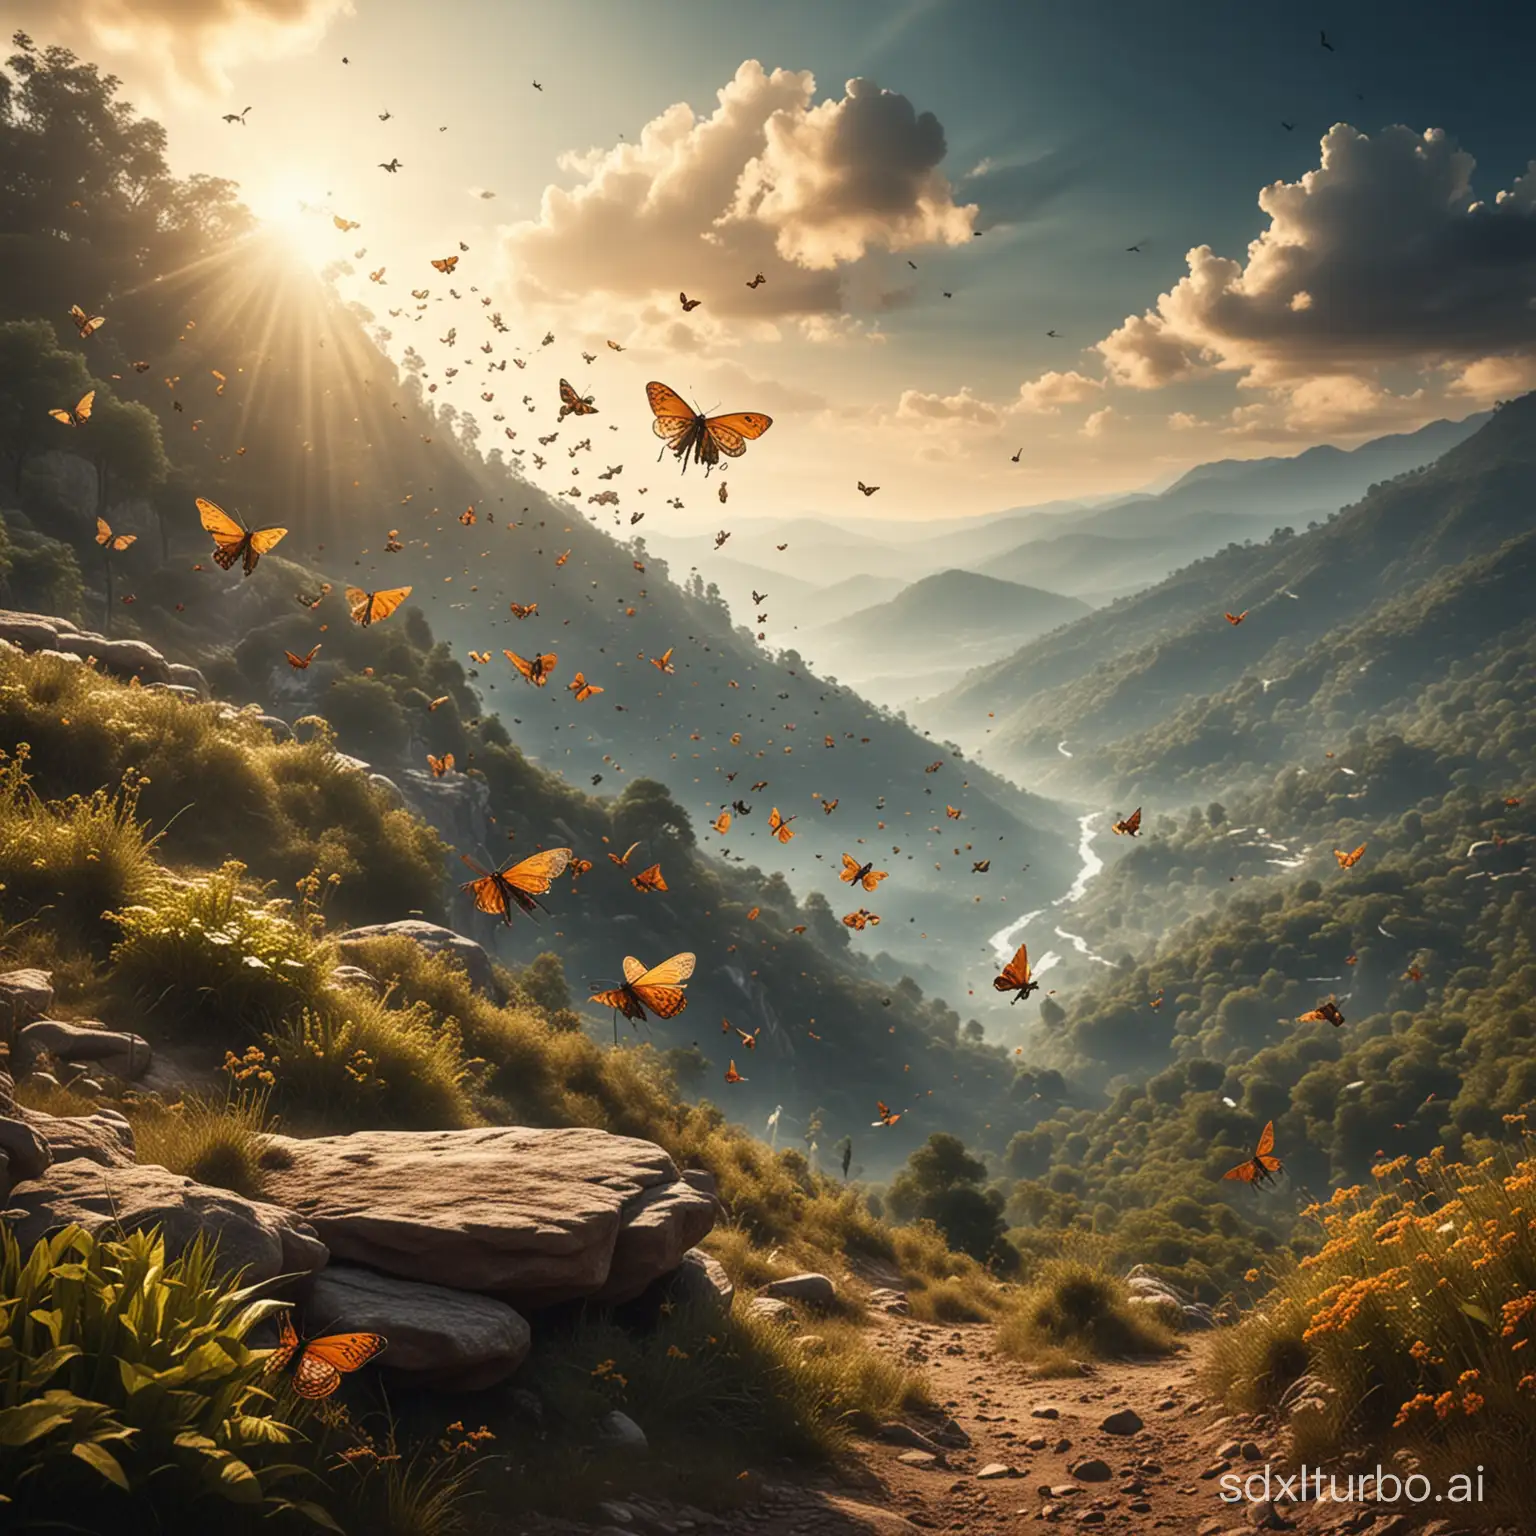 group of flying insects beautiful fantasy in hill station